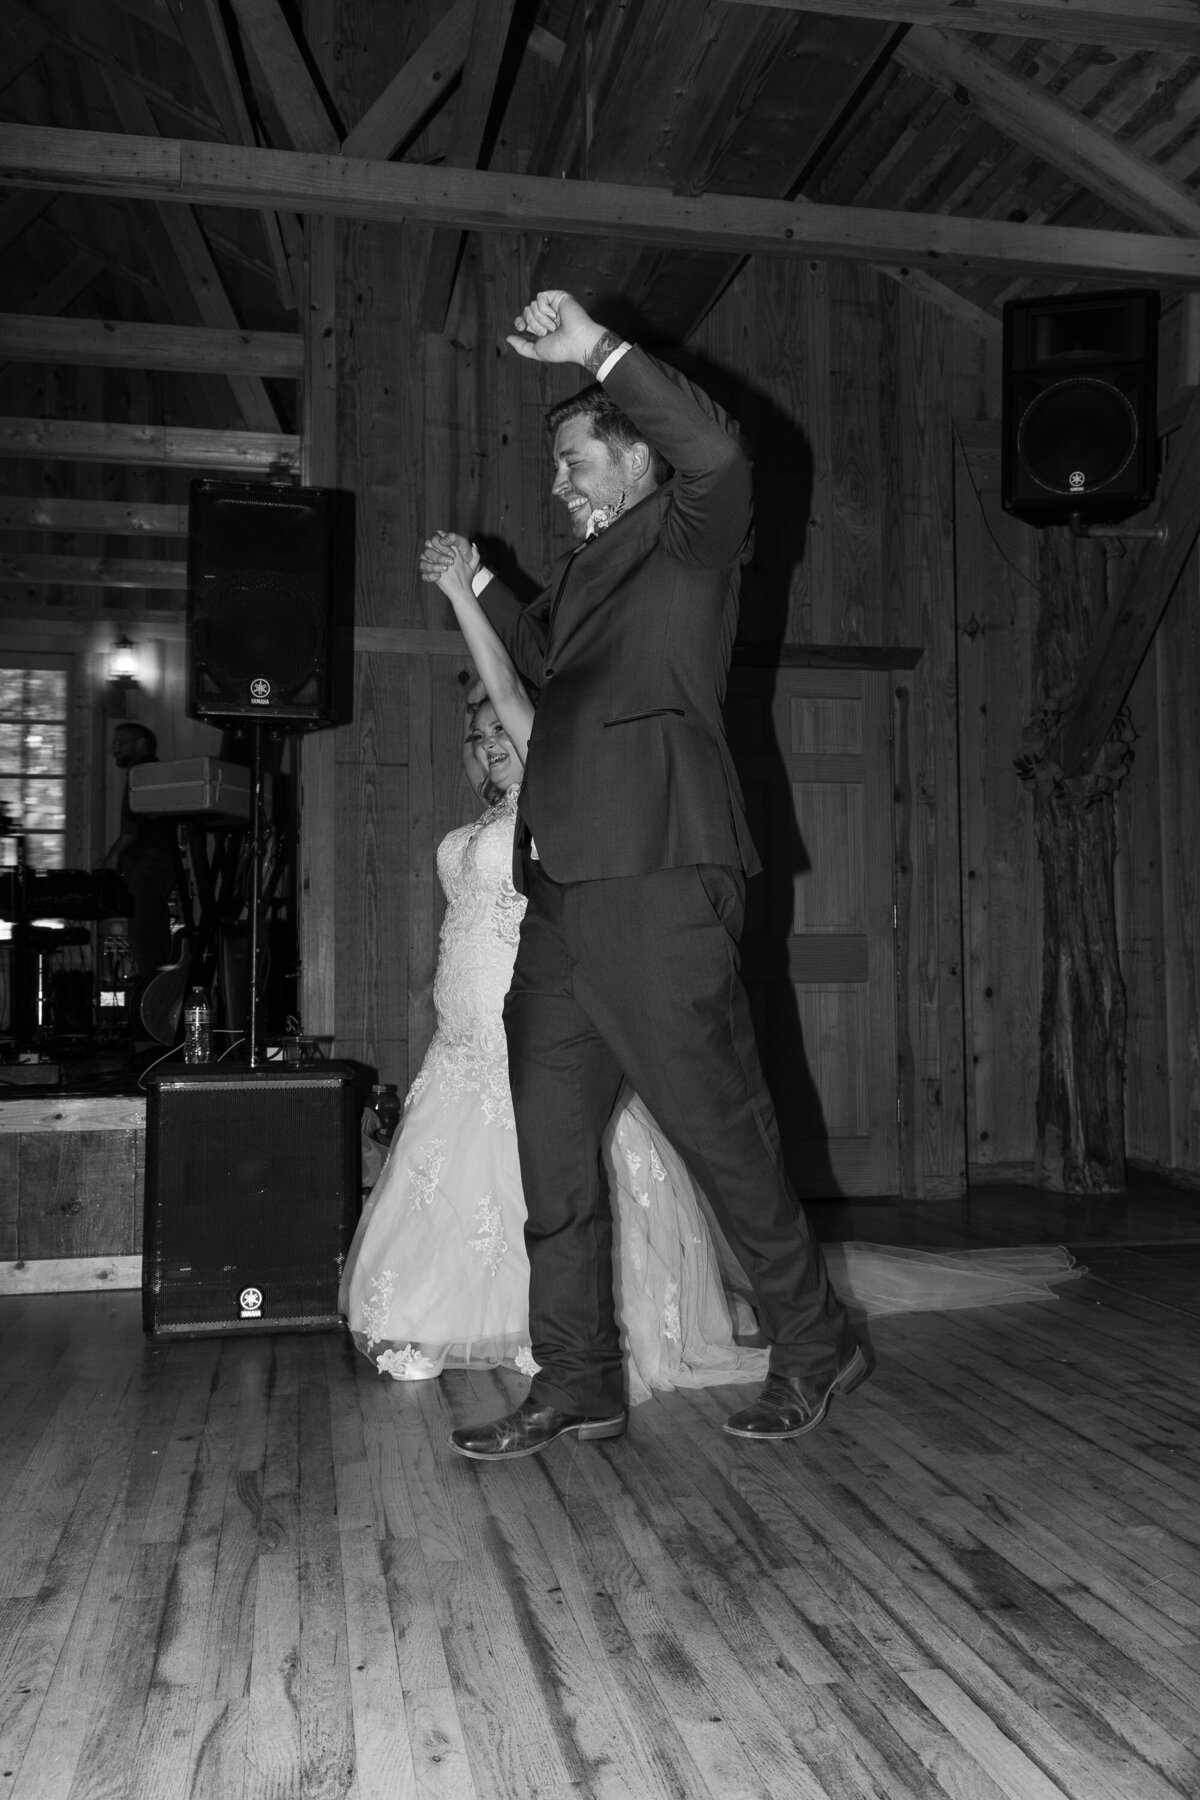 Austin wedding photographer capturing a bride and groom gracefully dancing in a charming barn.